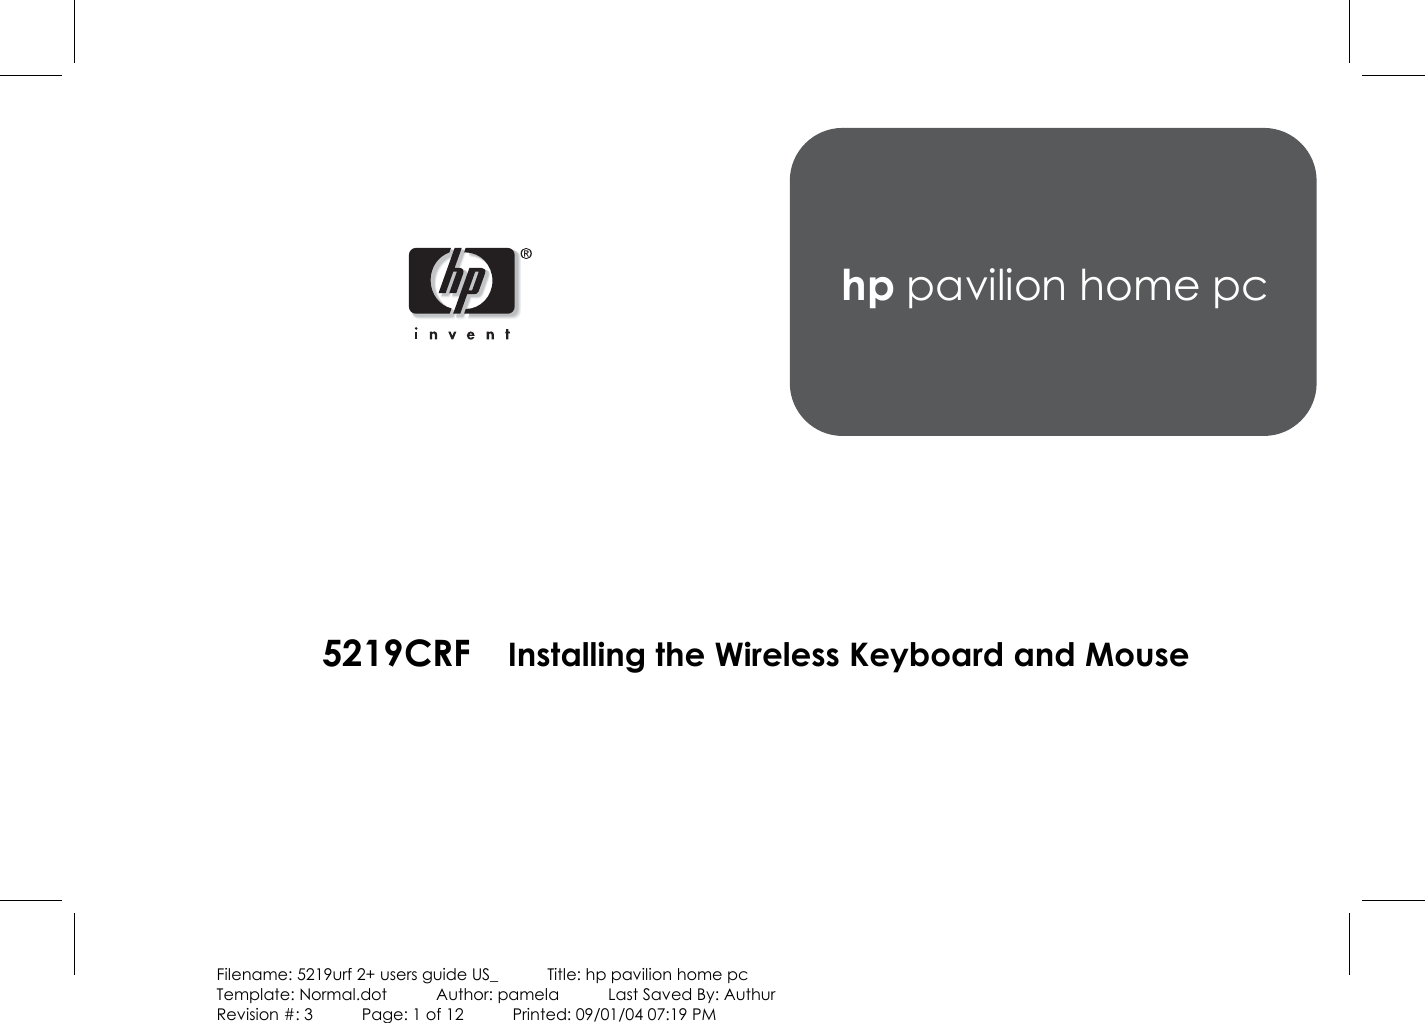    Filename: 5219urf 2+ users guide US_            Title: hp pavilion home pc Template: Normal.dot      Author: pamela      Last Saved By: Authur Revision #: 3      Page: 1 of 12      Printed: 09/01/04 07:19 PM   hp pavilion home pc  5219CRF  Installing the Wireless Keyboard and Mouse    